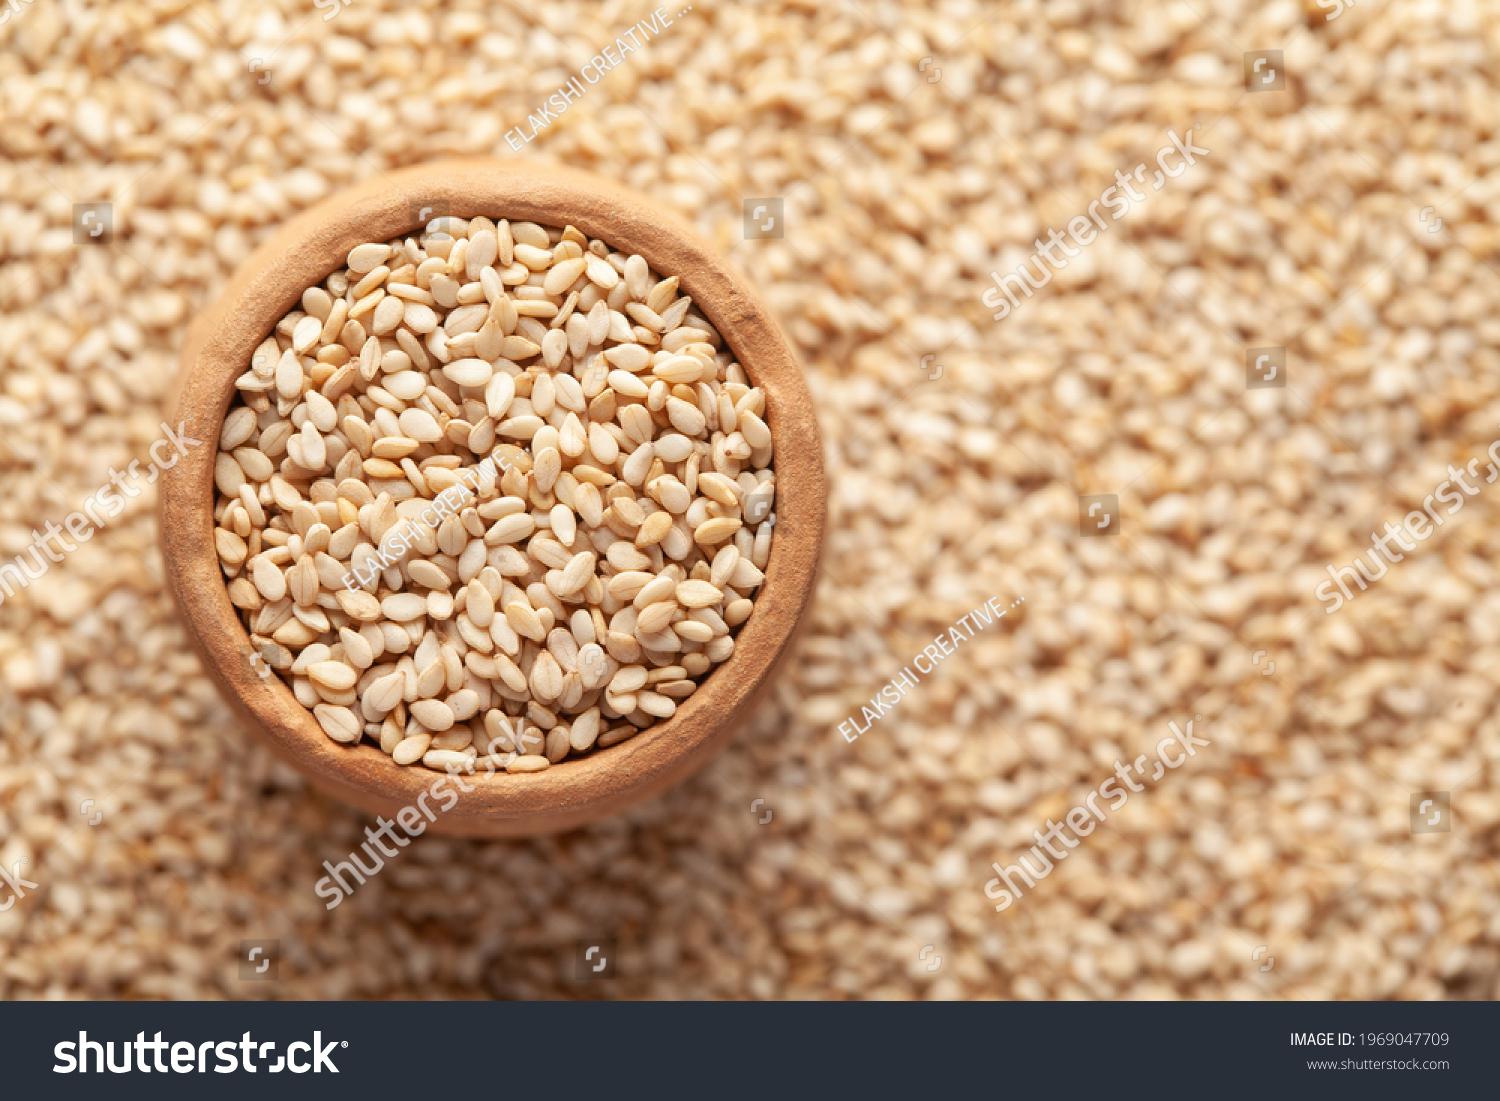 Macro Close-up of Organic White Sesame seeds(Sesamum indicum) or white Til in an earthen clay pot (kulhar) on the self background. Top view
 #1969047709